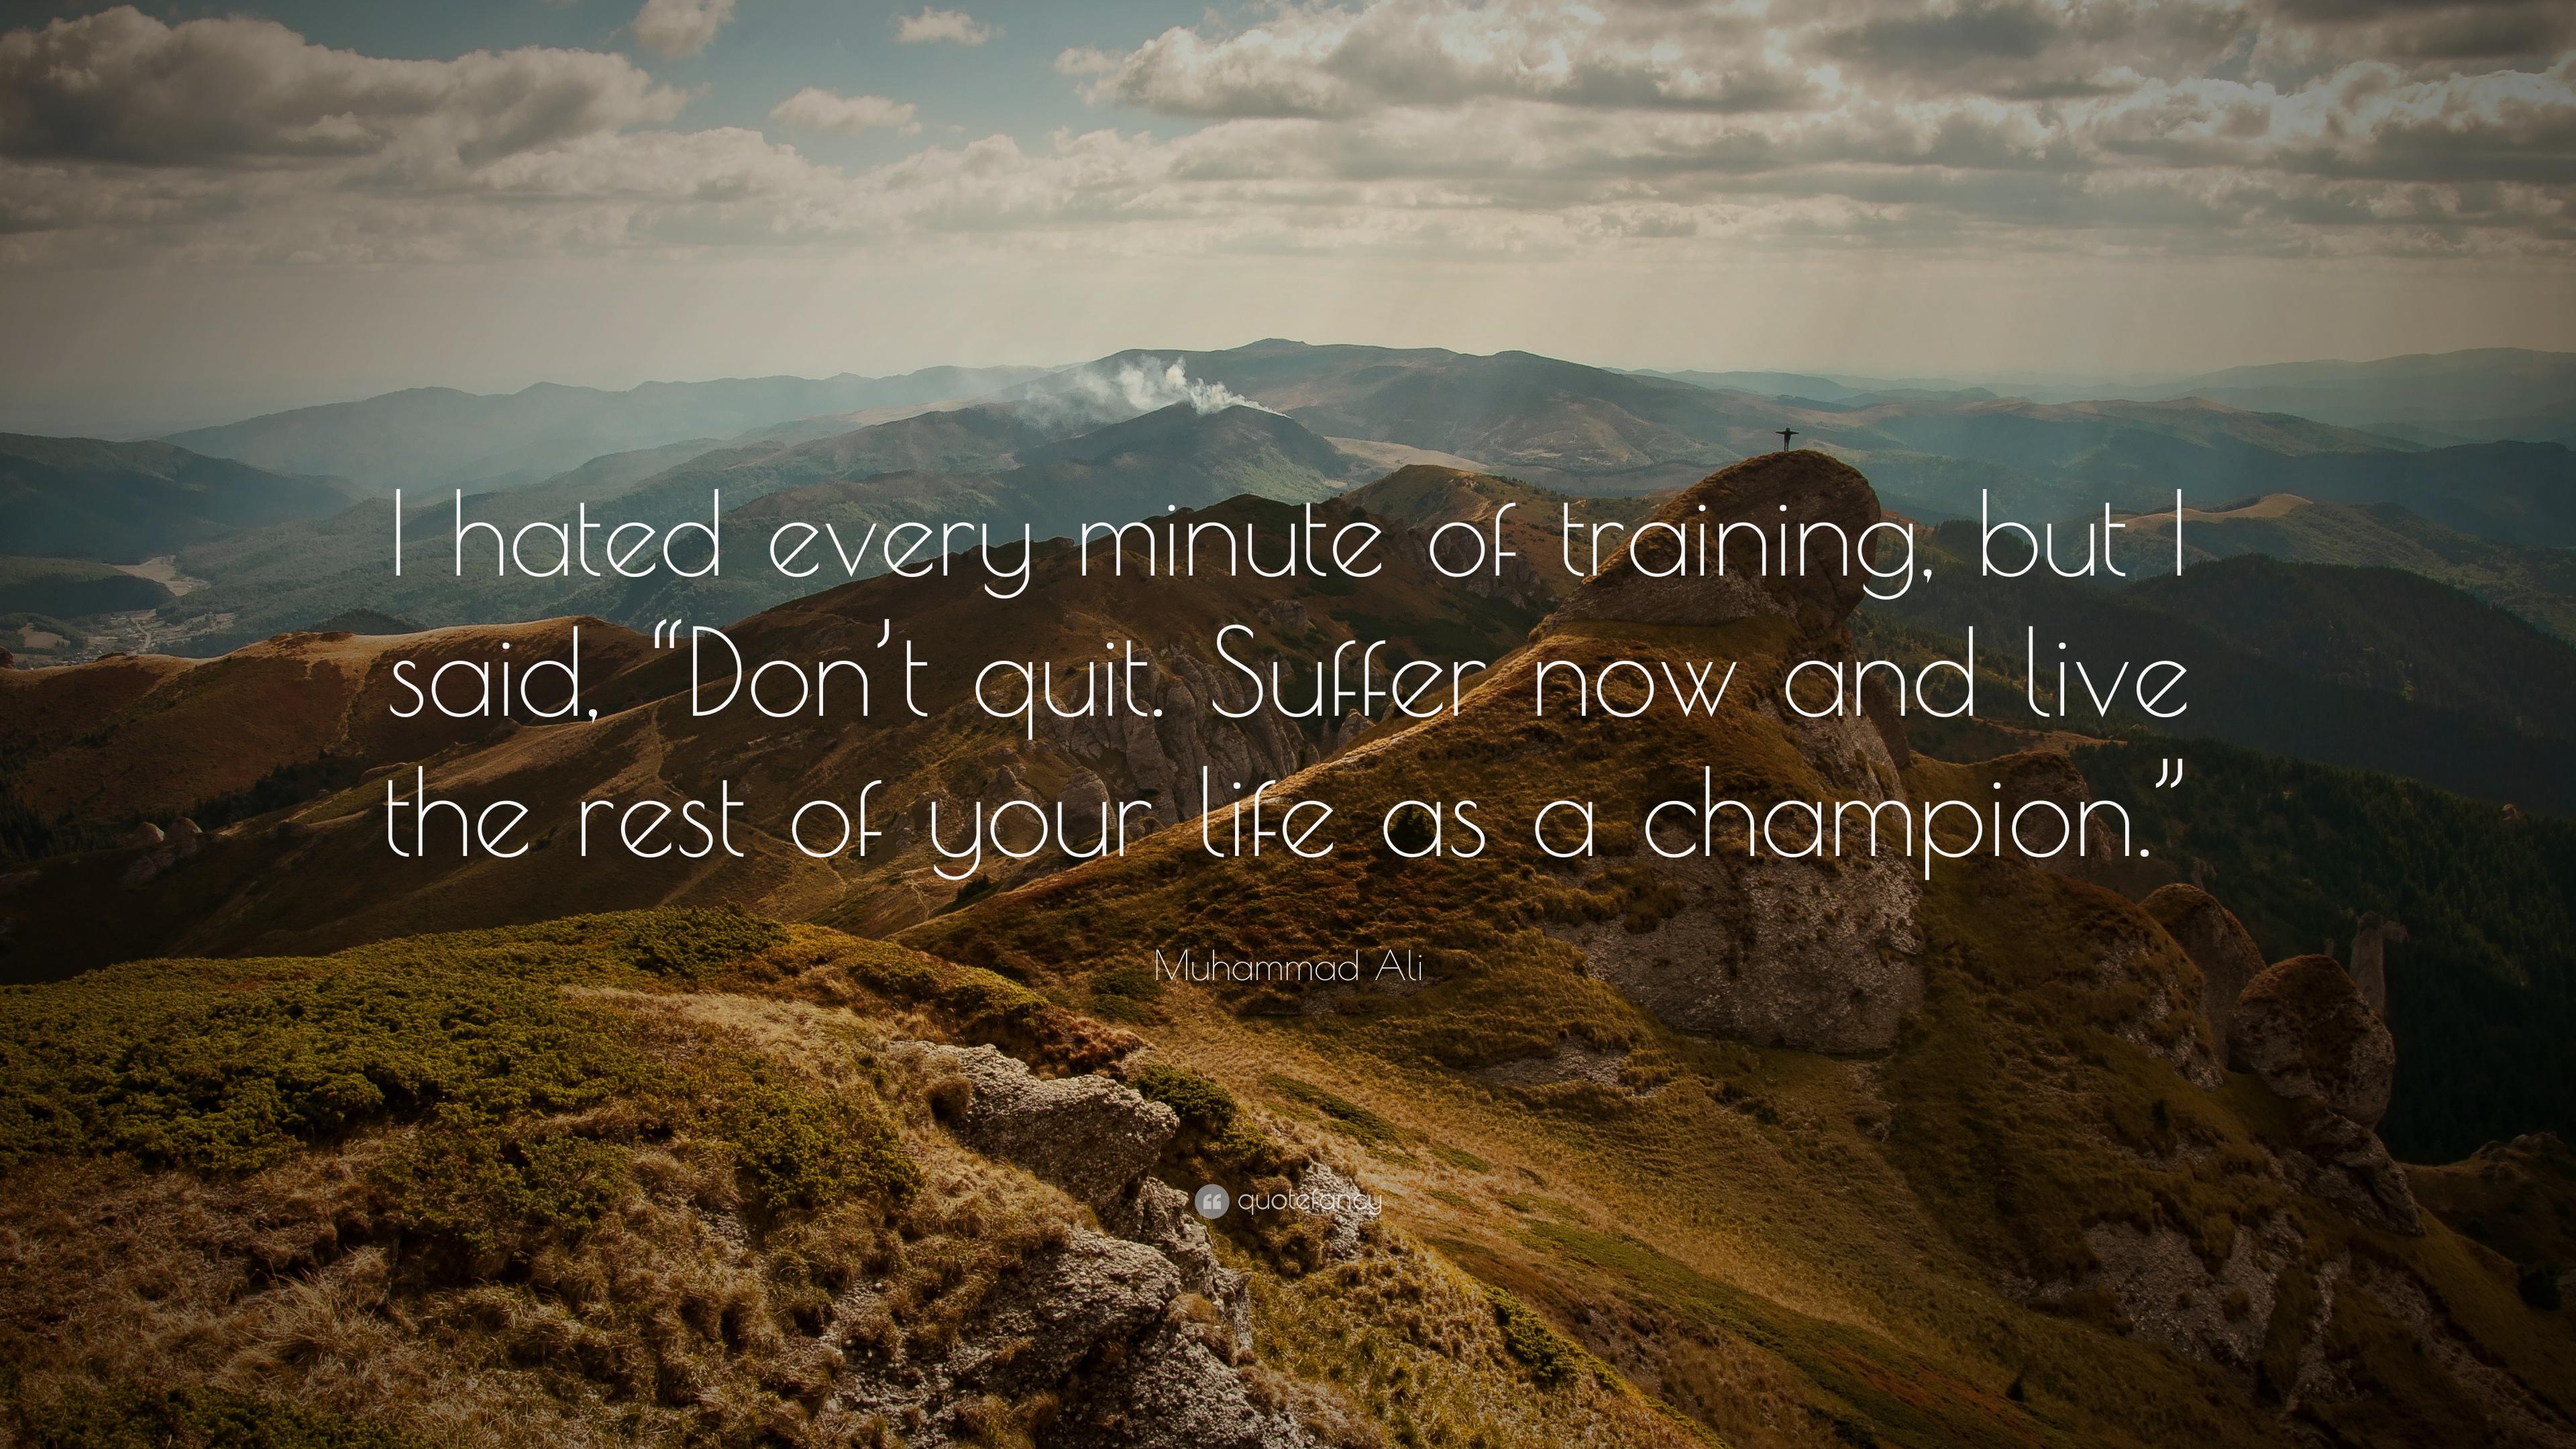 Muhammad Ali Quote: “I hated every minute of training, but I said